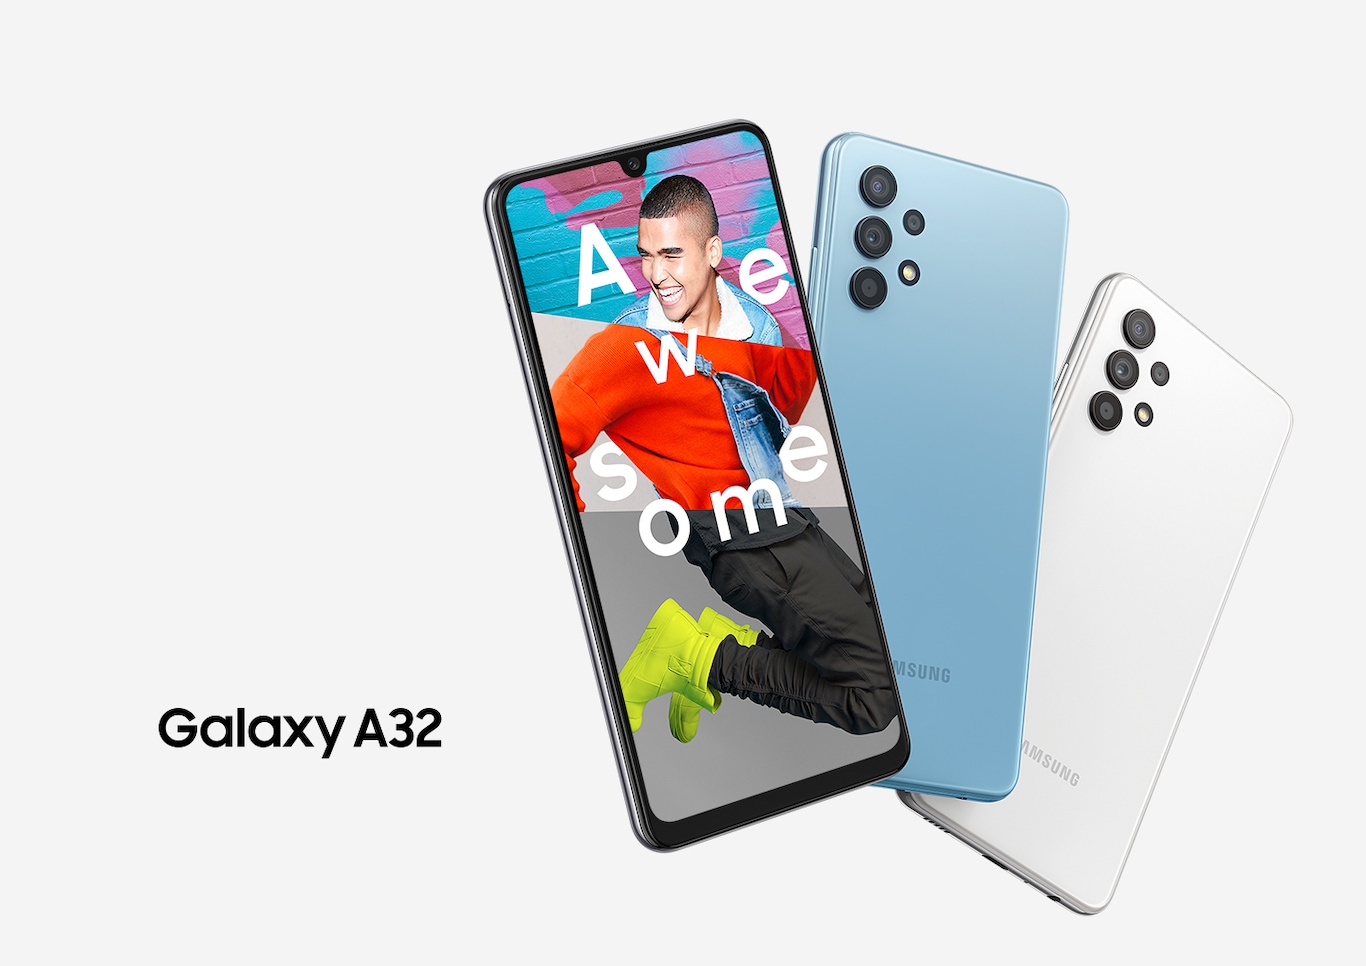 Galaxy A32 Key visual comes out in three devices with its official logo on the side. On the screen, an excited young man hop on where he is standing, surrounding the text of `Awesome` on him.